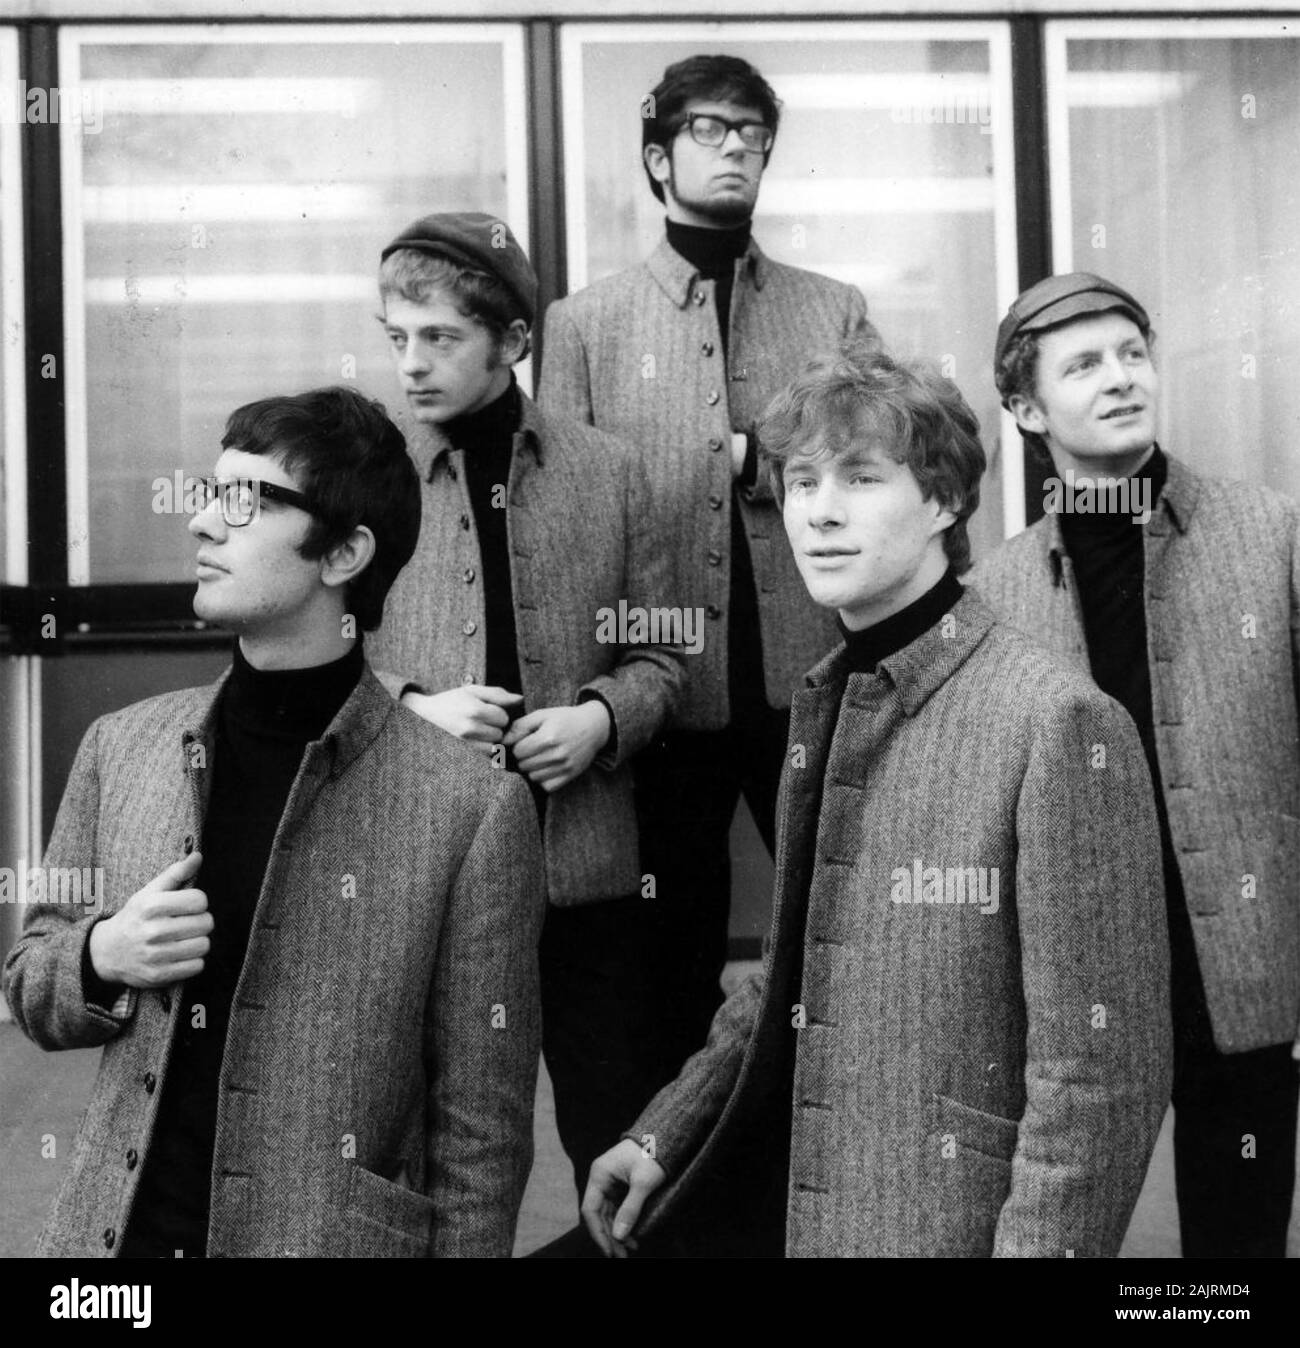 MANFRED MANN Promotional photo of English pop group about 1964. From left: Tom McGuinness, Mike Hugg, Manfred Mann, Paul Jones, Mike Vickers Stock Photo